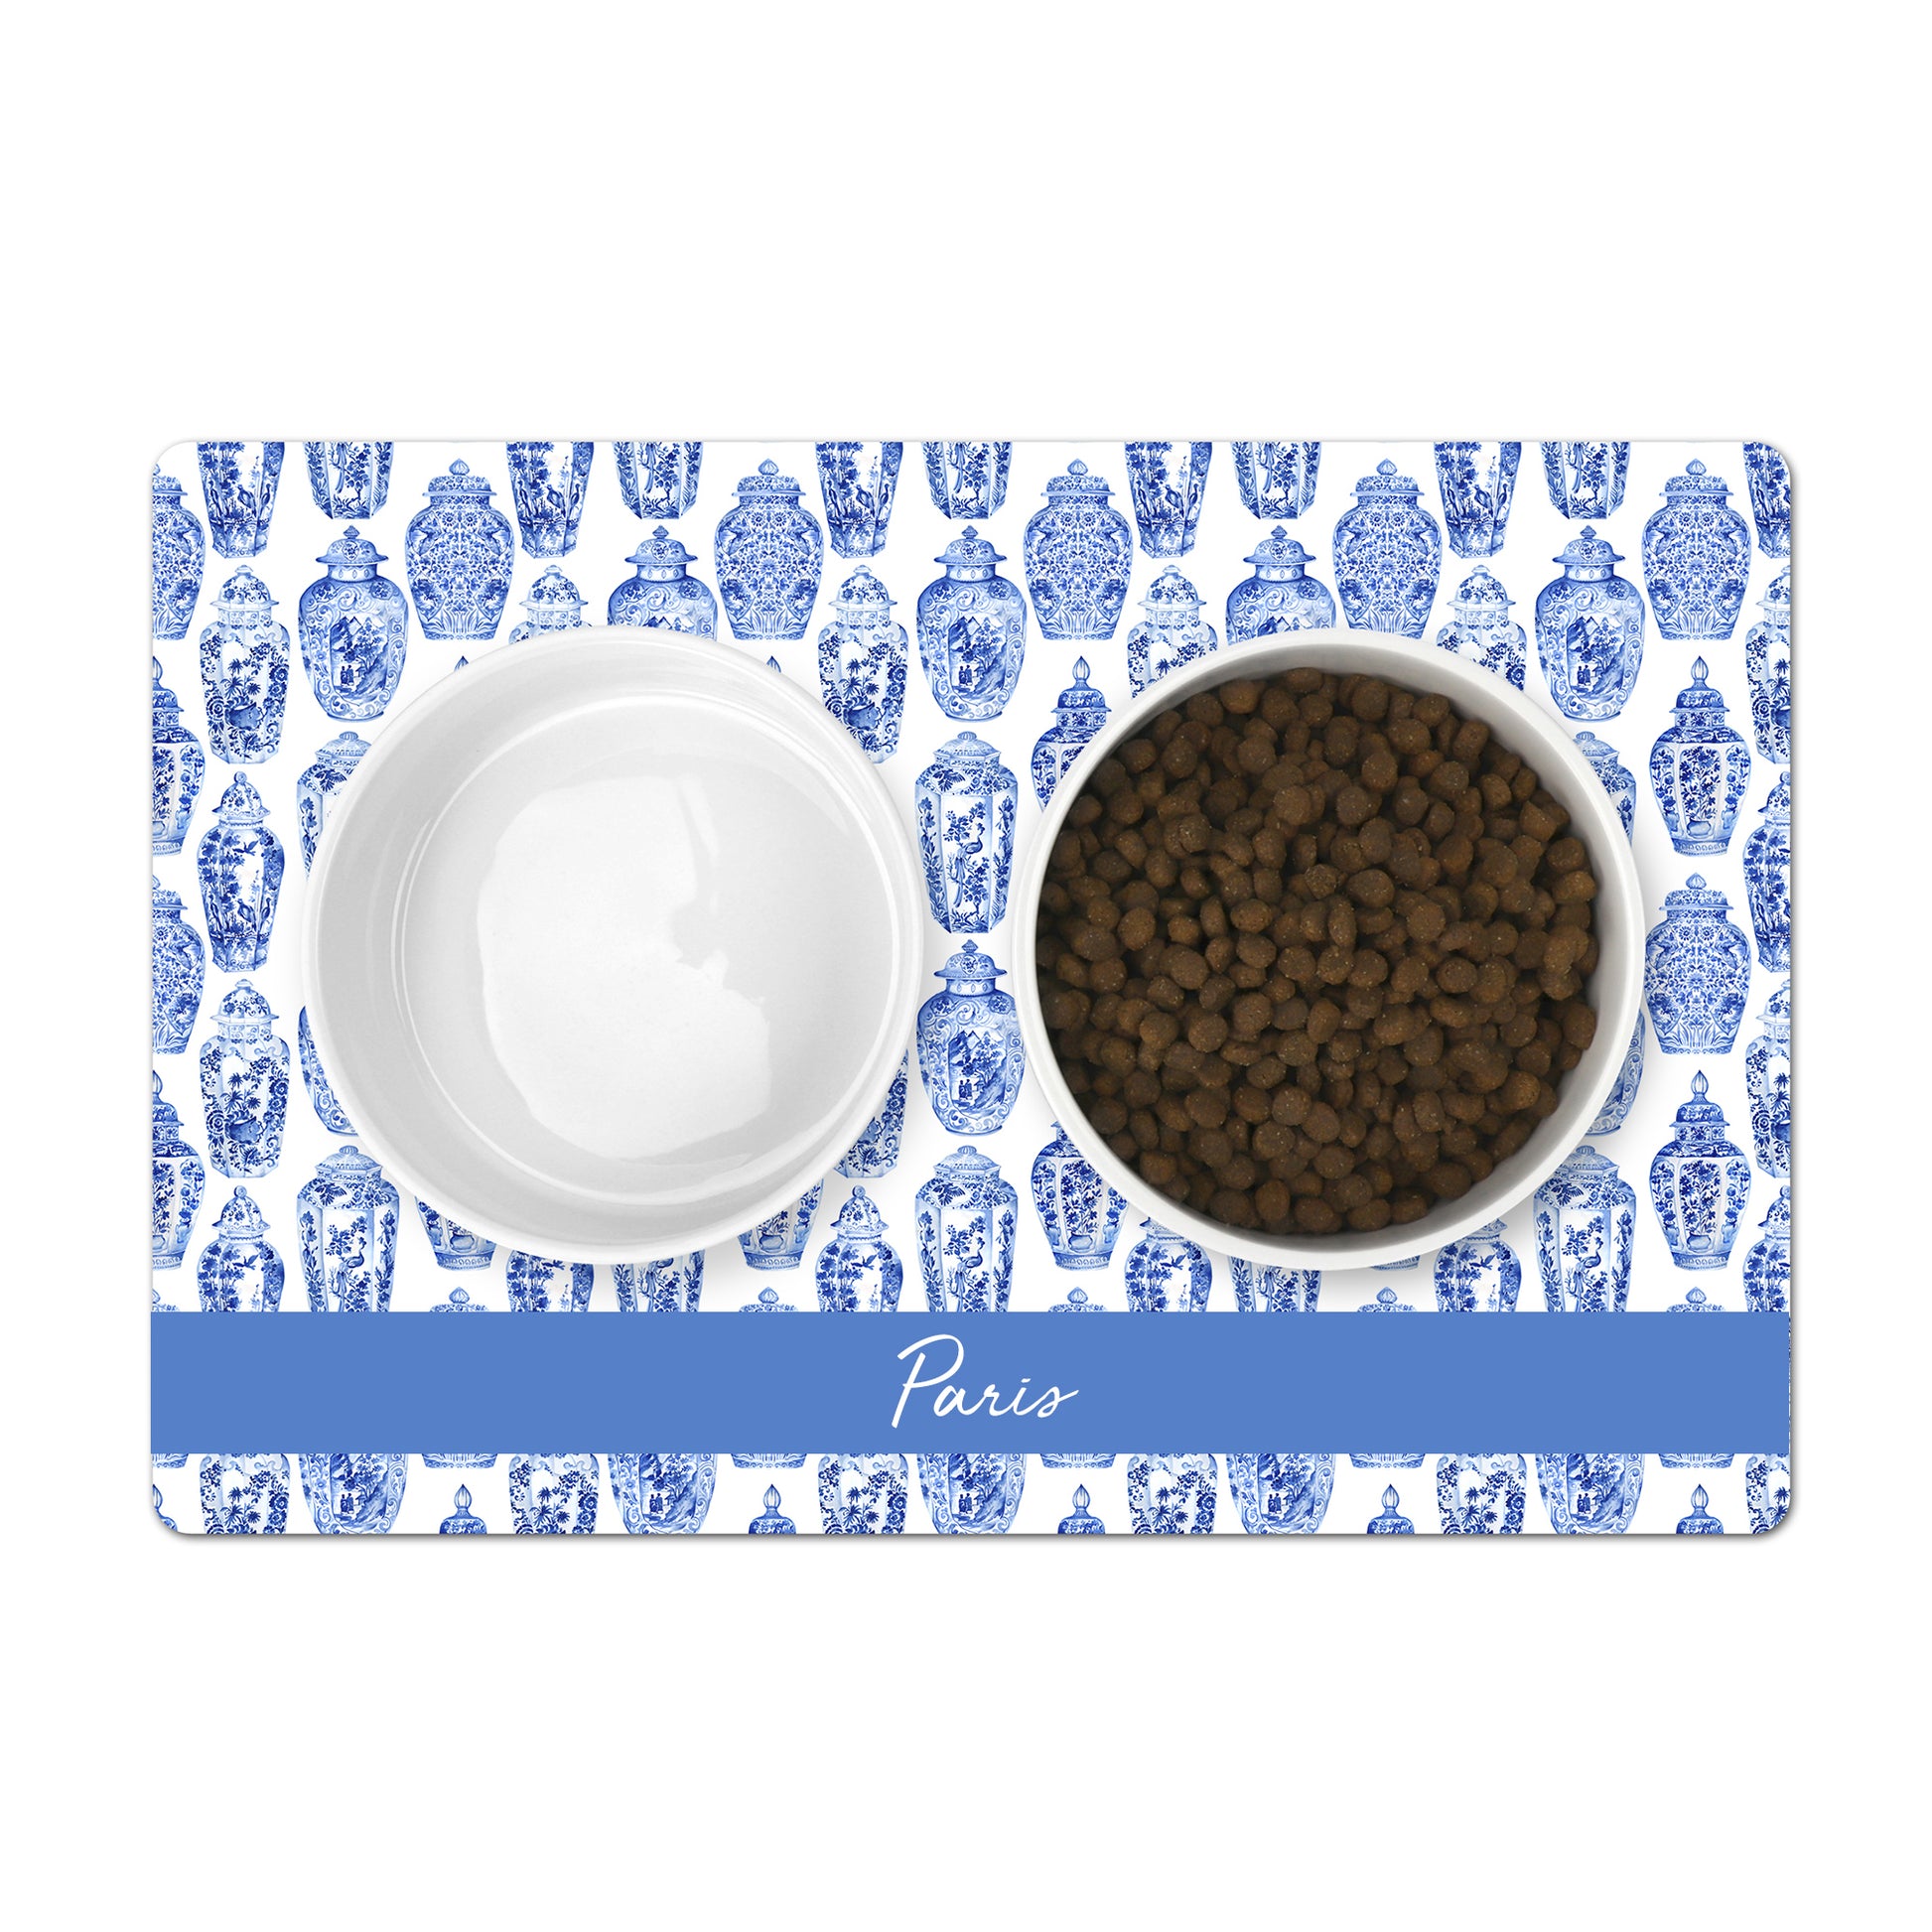 Personalized pet mat featuring chinoiserie pattern of blue and white ginger jars with custom printed pet name.